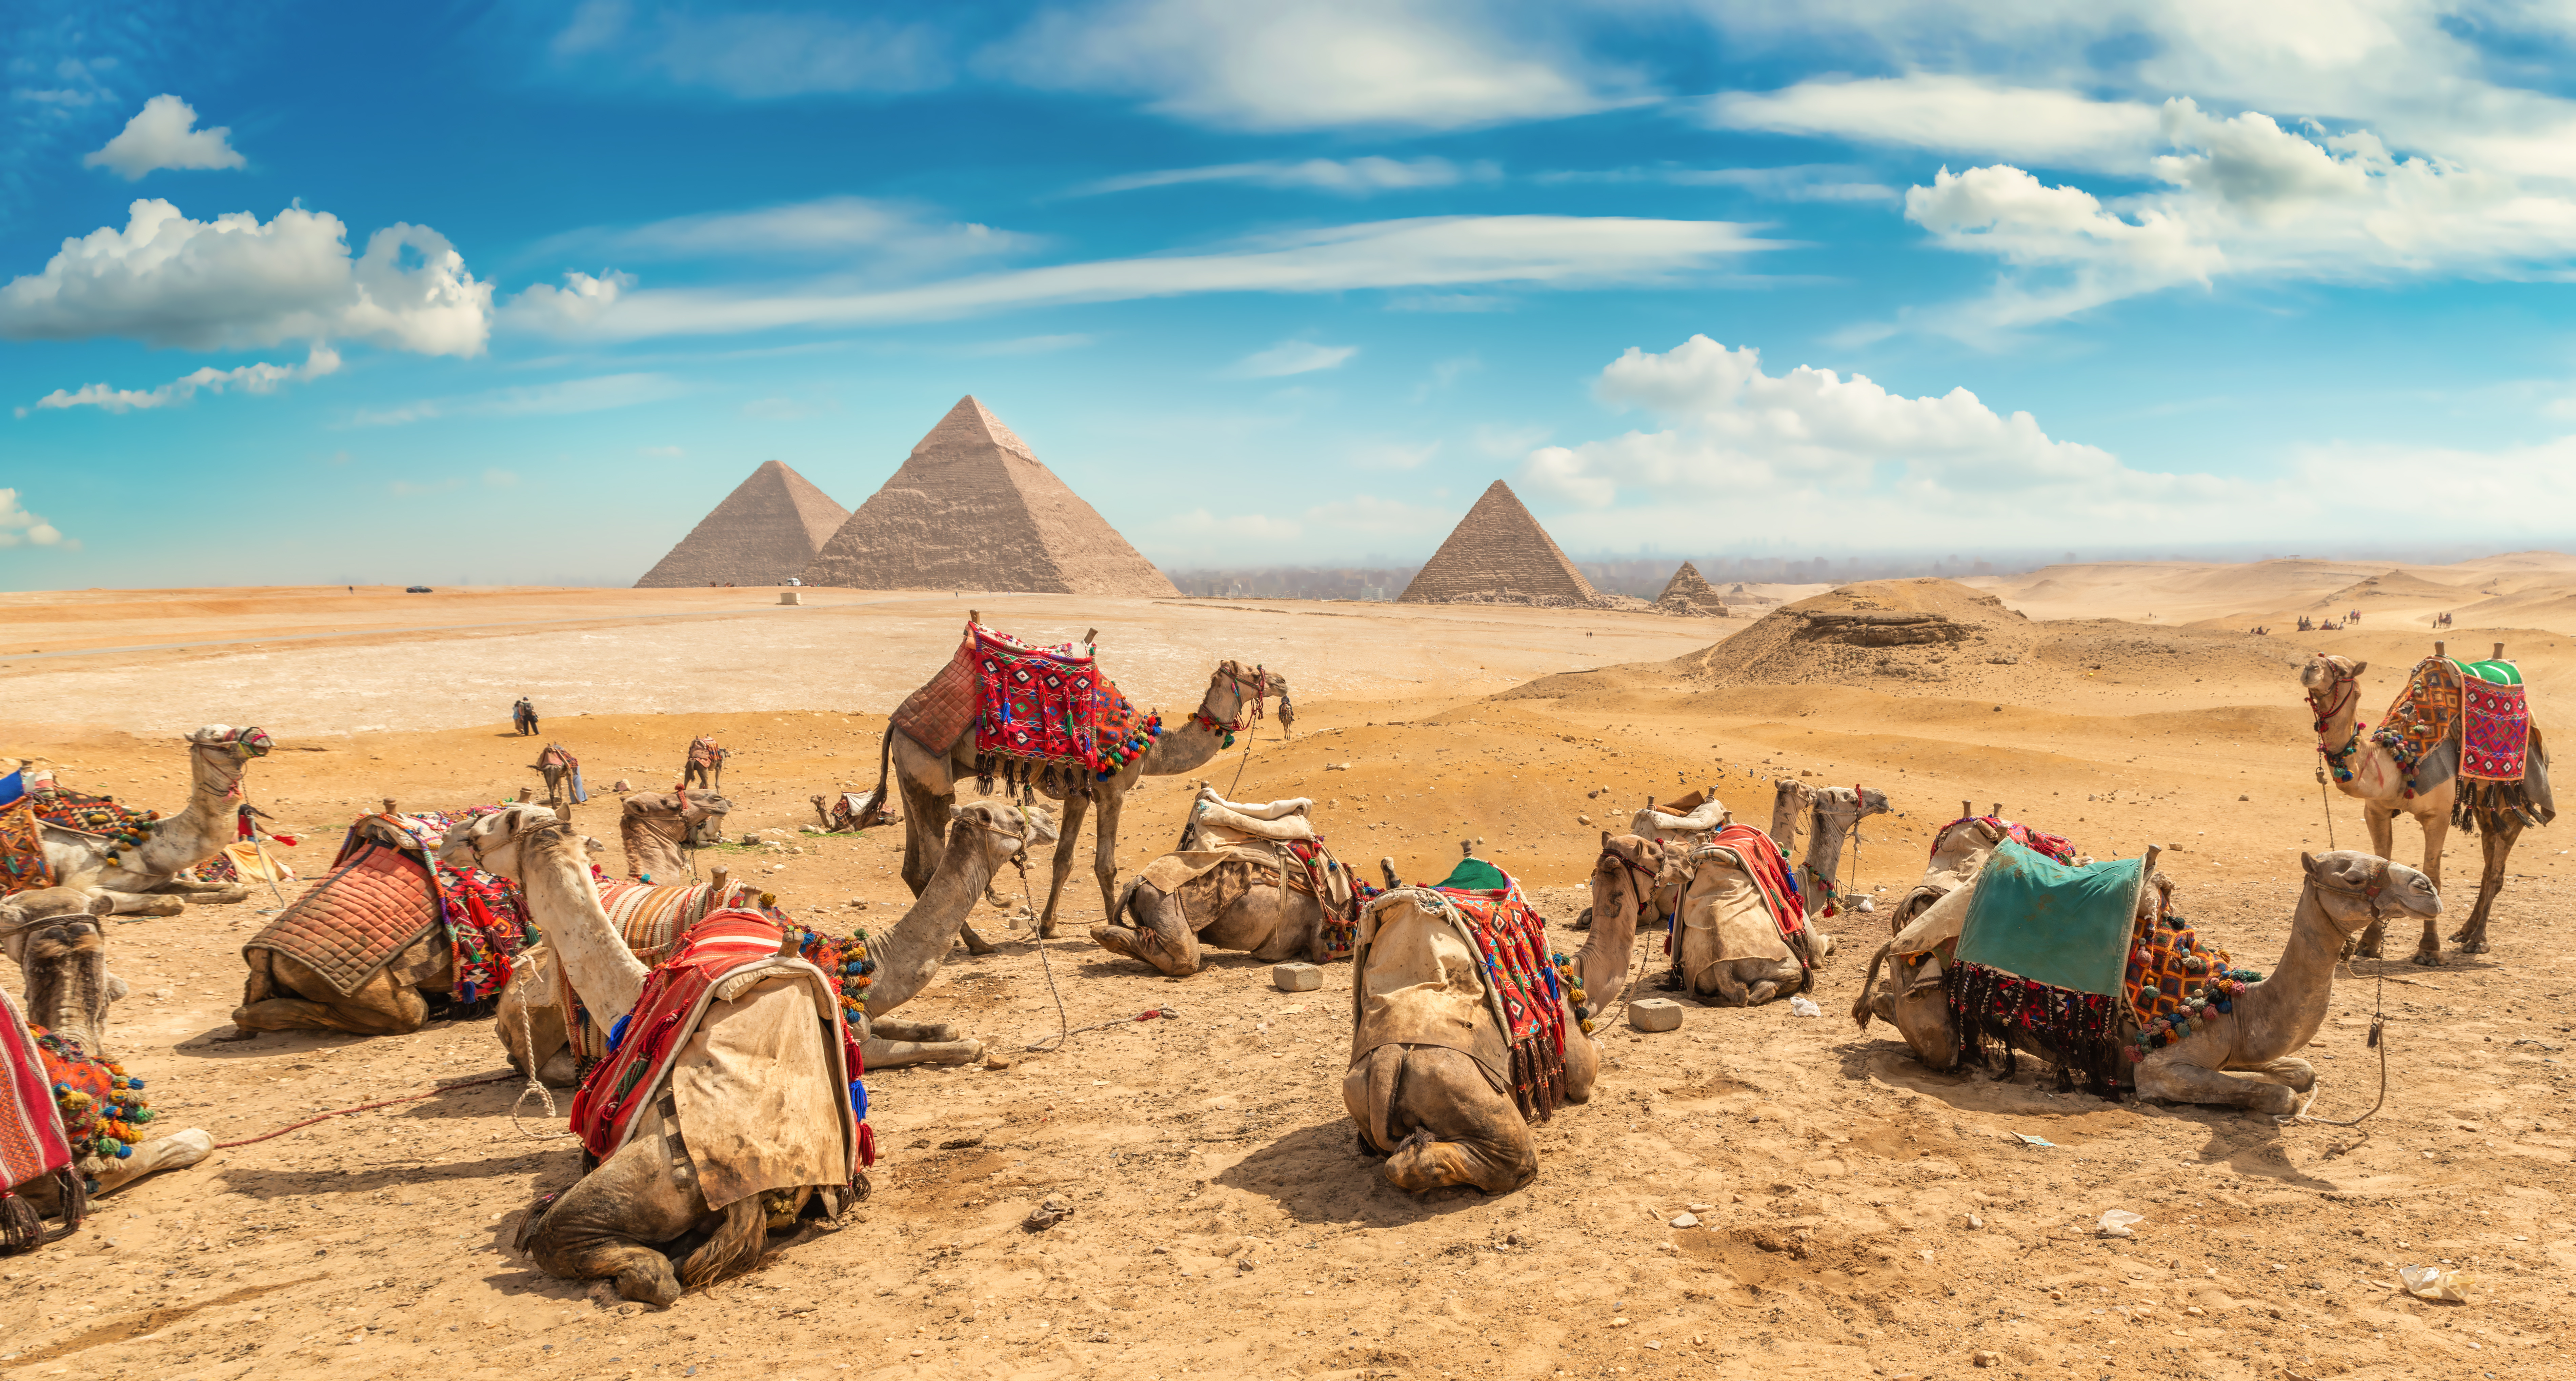 Camels in sandy desert near pyramids at day.Cairo, Egypt.